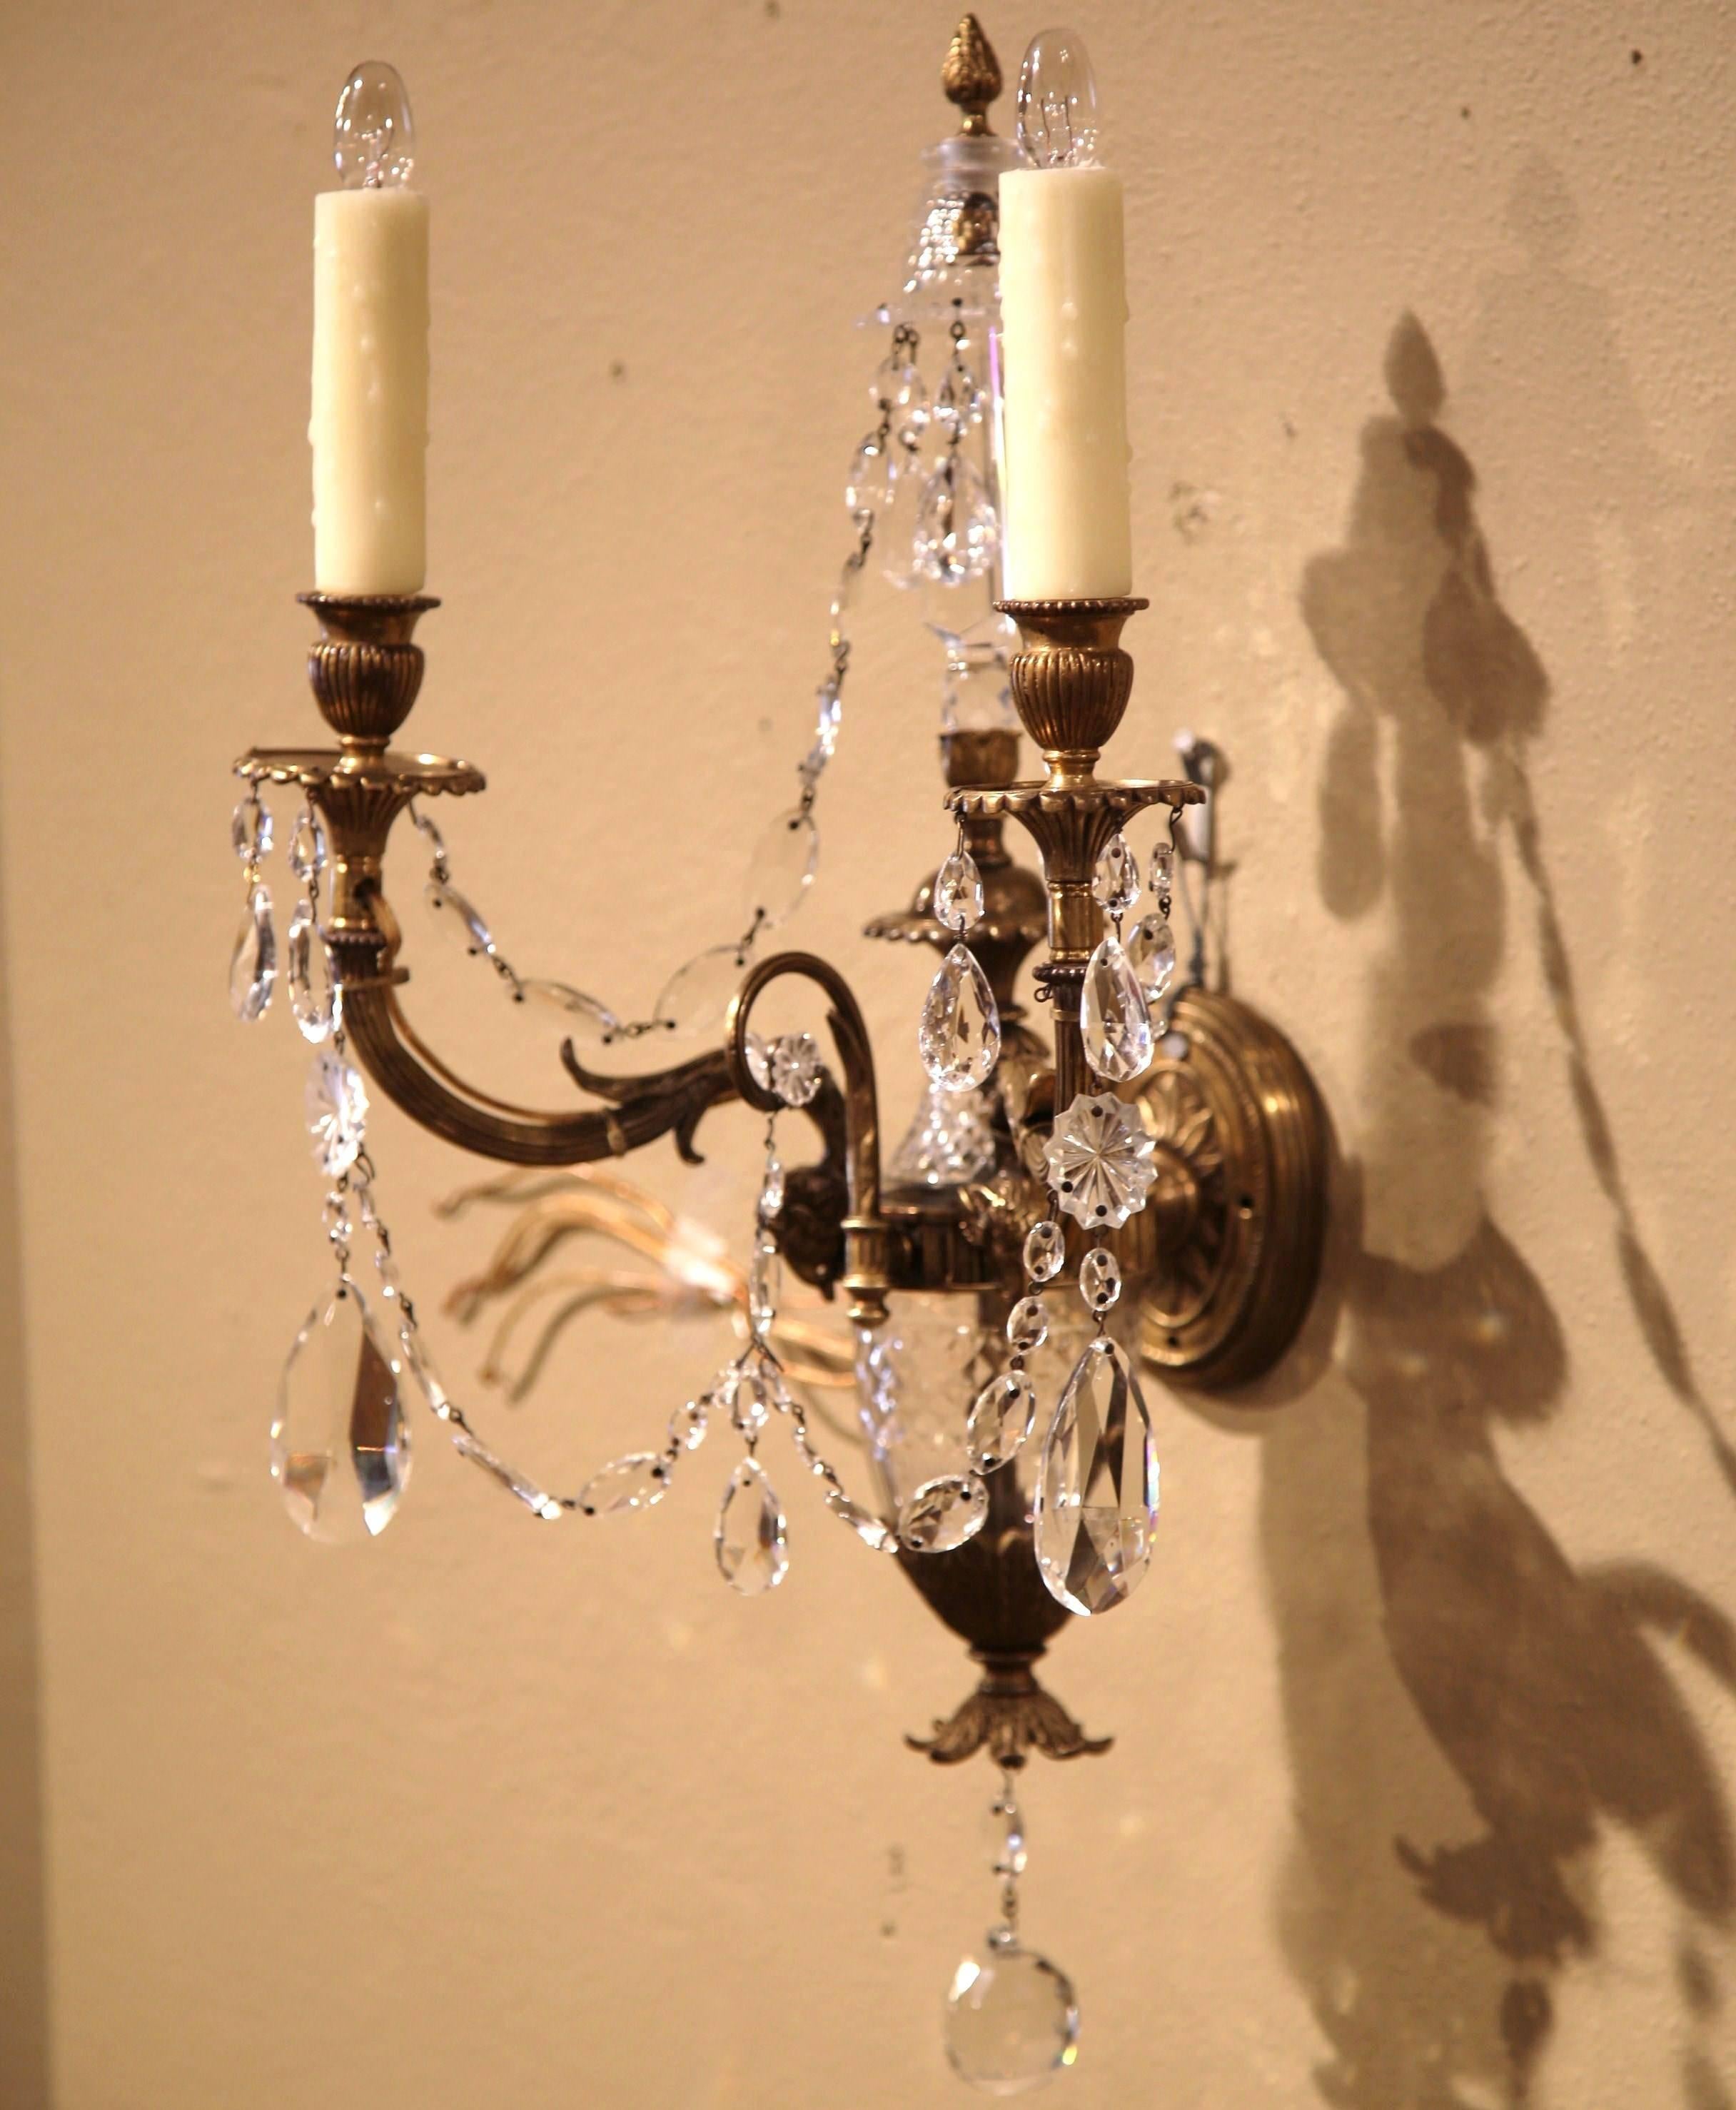 Light up your home with this elegant pair of antique wall lights from France, circa 1880. The sconces each feature two intricate bronze arms with ram heads, cut-glass swags and other beautiful glass decorations. Both fixtures have new wiring